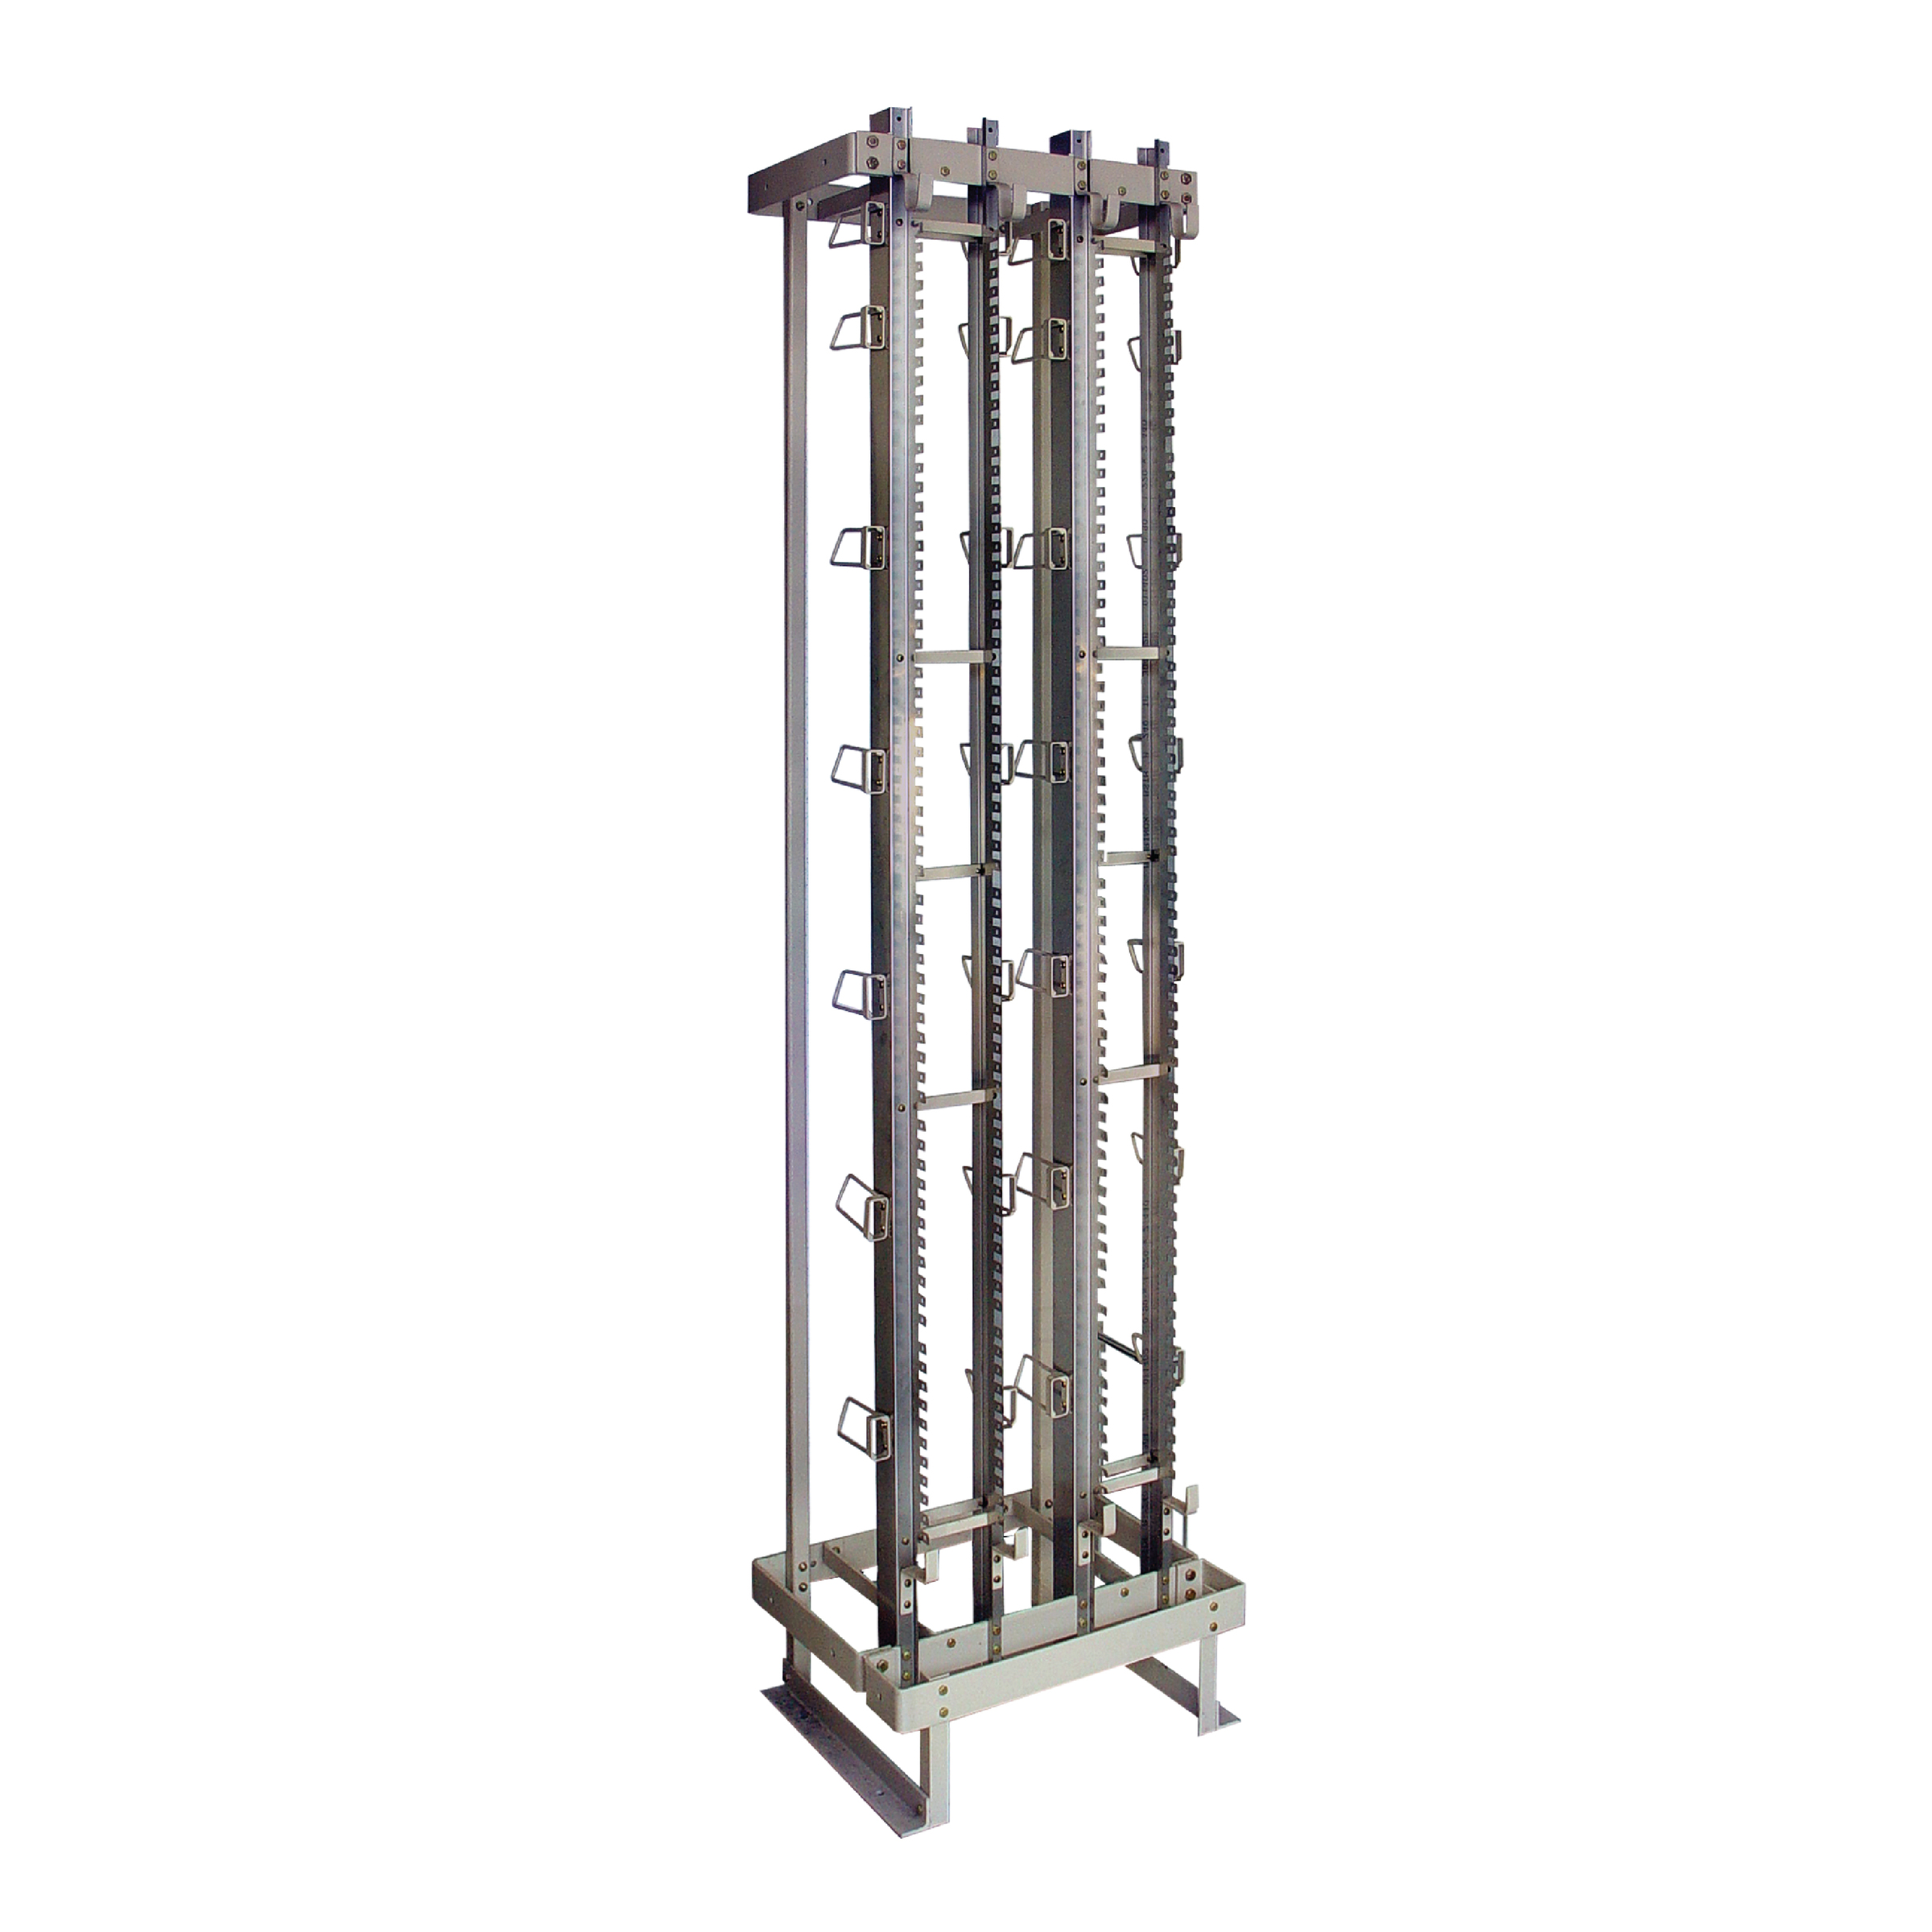 Voice & Data_Modular Connecting System_Free Standing Frame_1200 Pair.jpg